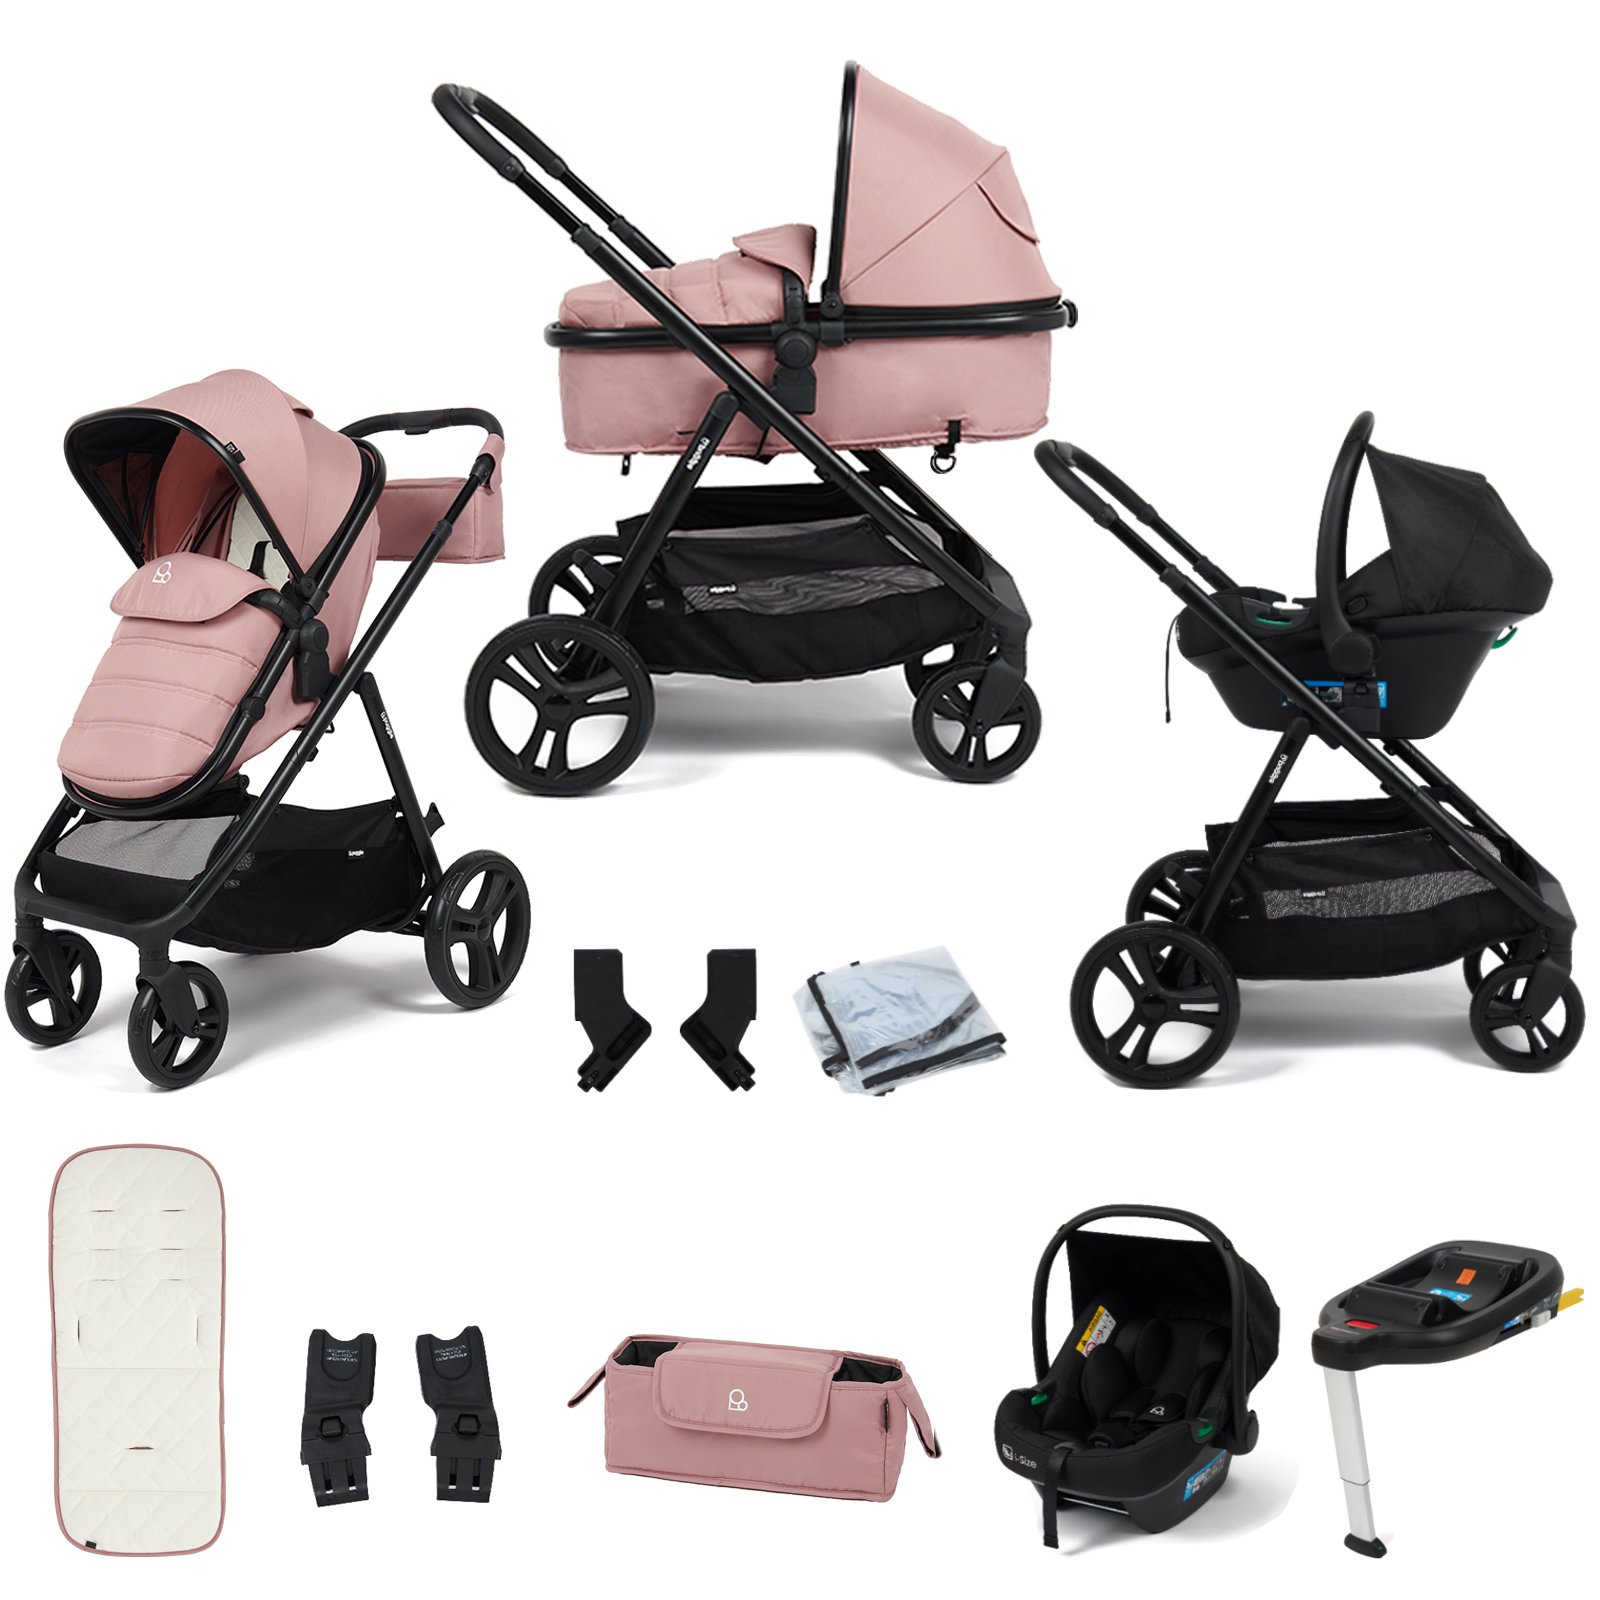 Puggle Memphis 2-in-1 i-Size Travel System with ISOFIX Base - Dusk Pink